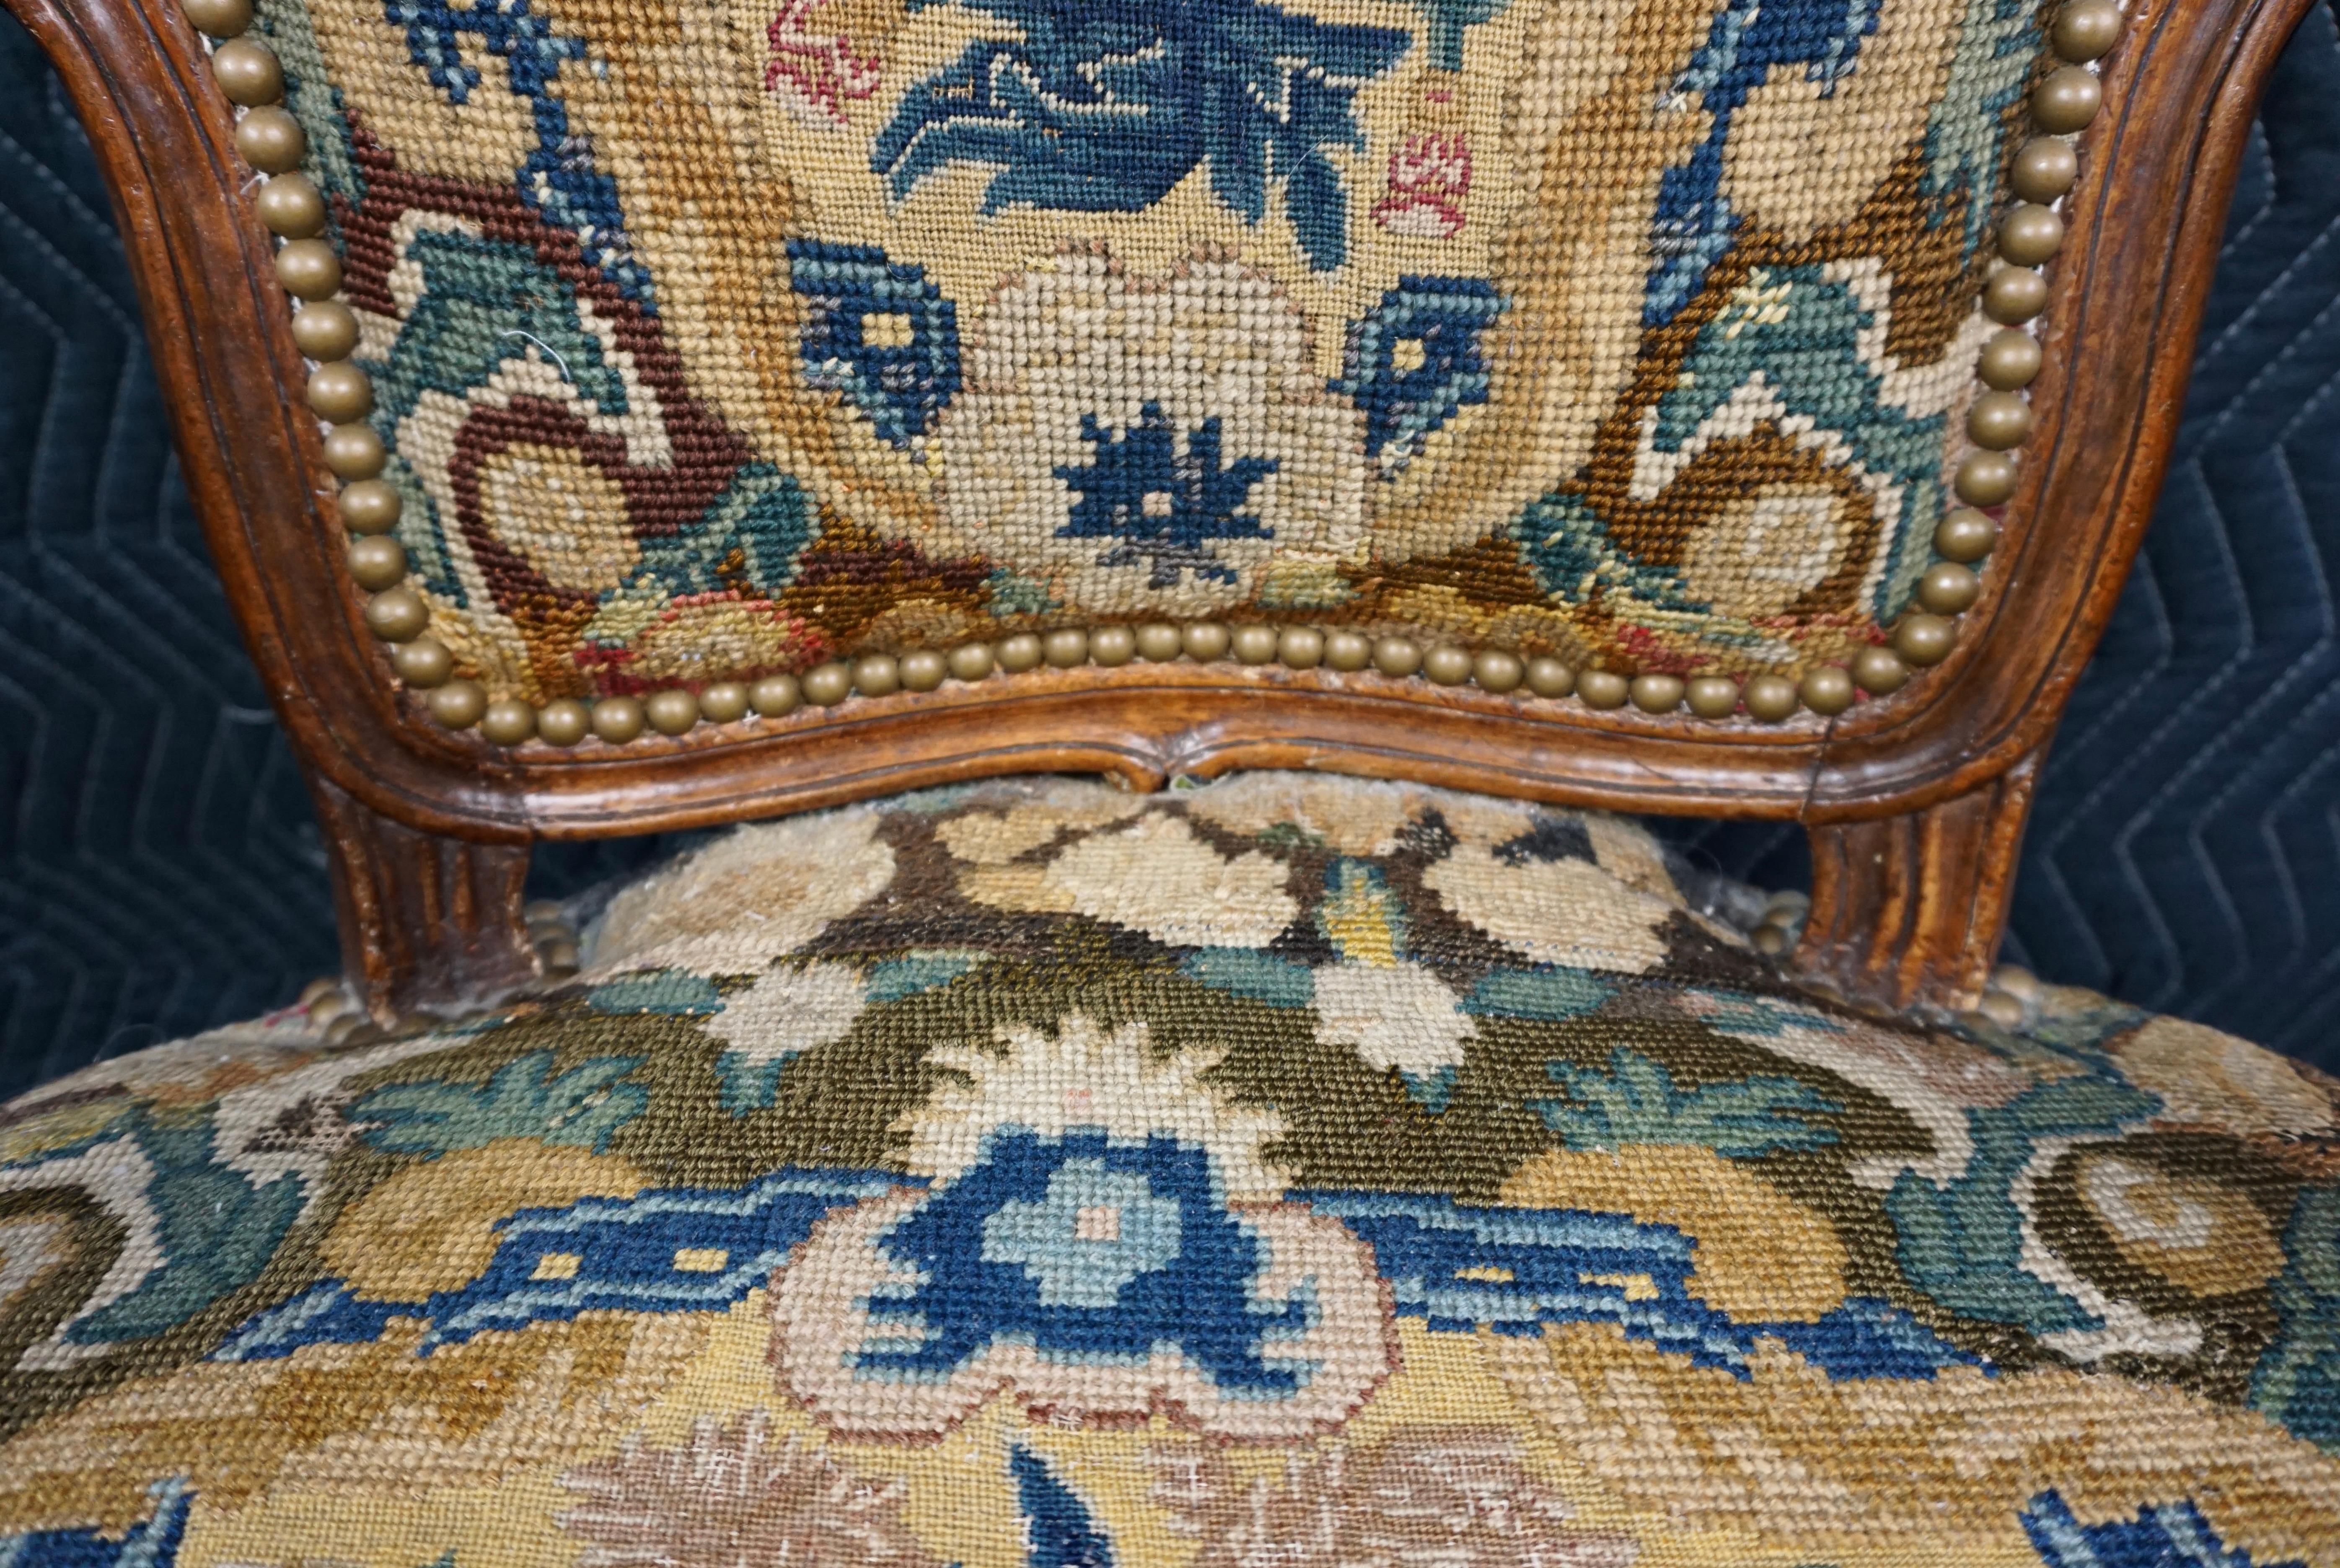 A lovely small scale Louis XV style armchair upholstered in gros and petit point needlework, the frame with well carved details on the crestrail and seat frame. Circa 1800-1840.
